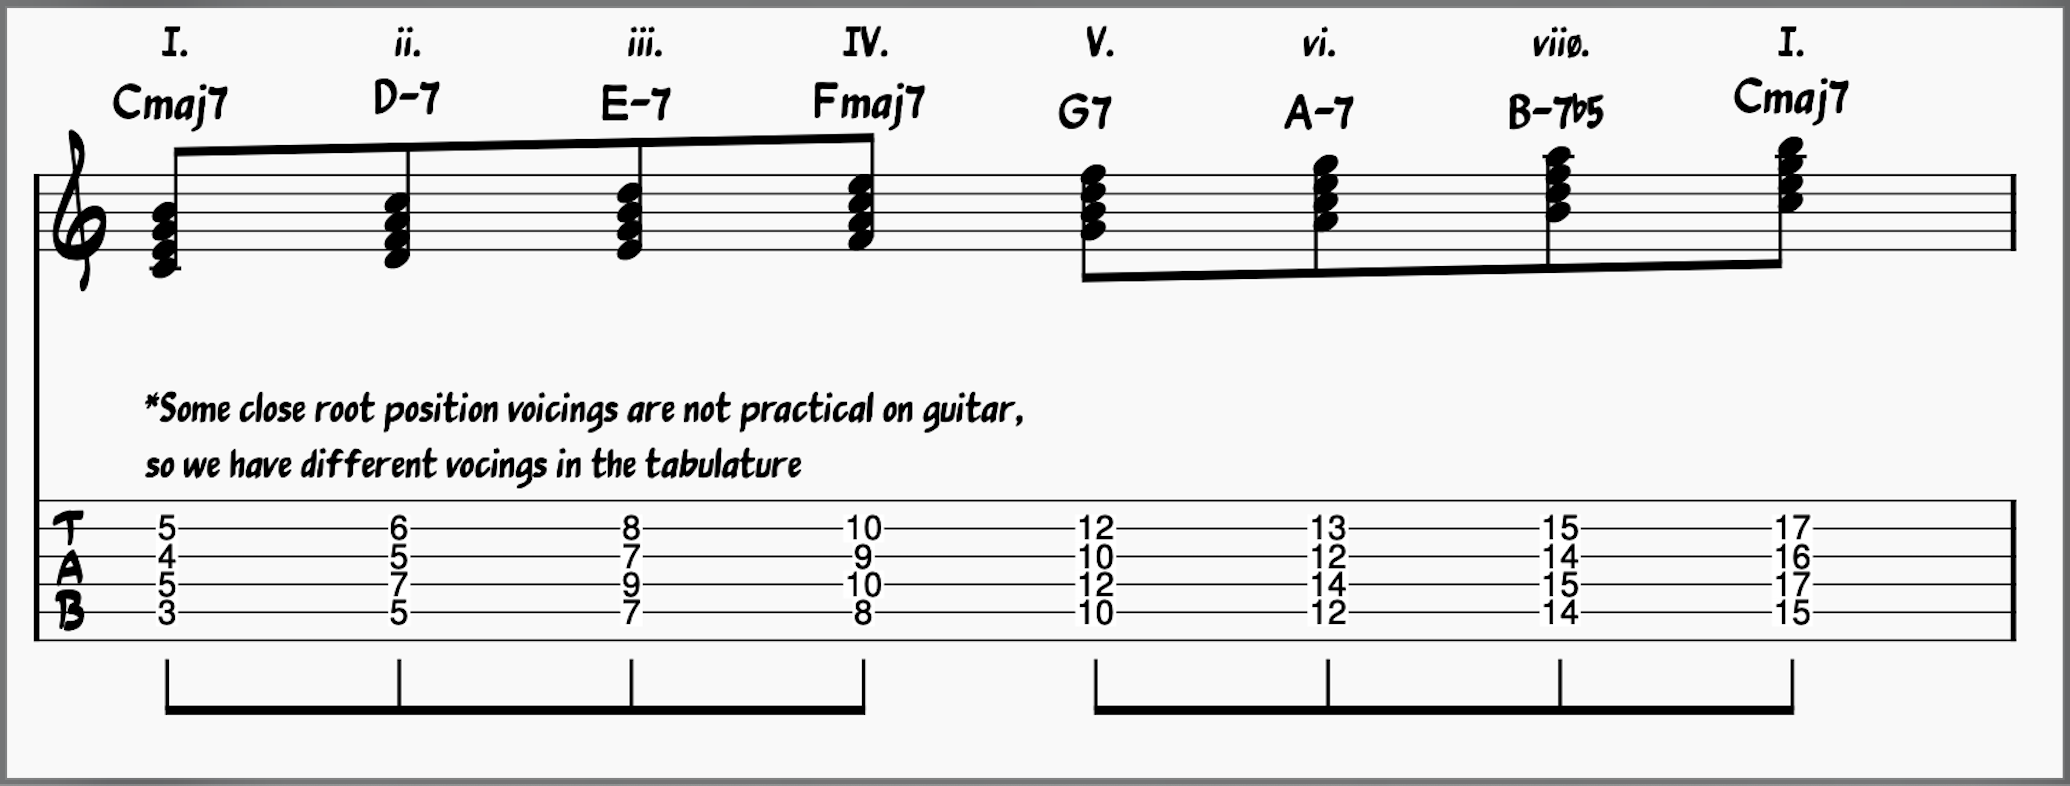 Chords in the key of C major notated on the staff in in tabulature